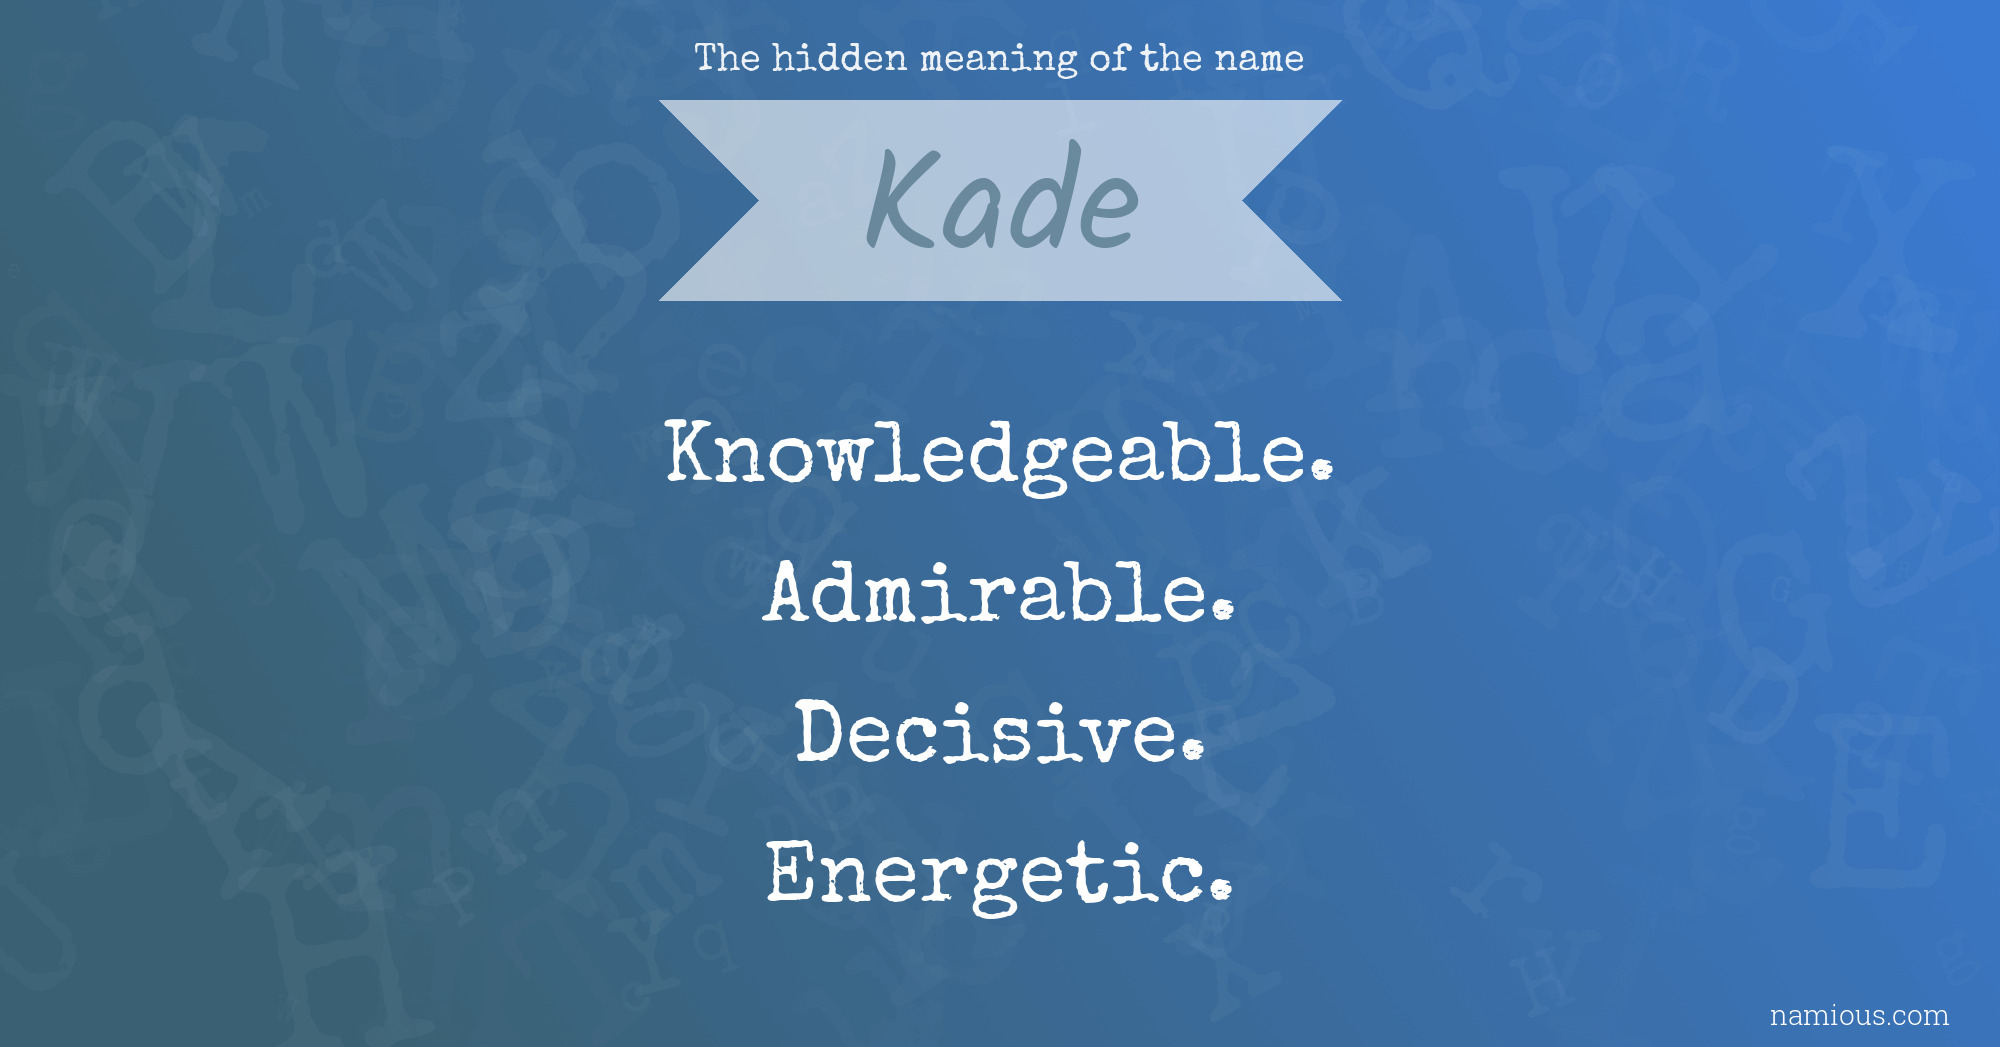 The hidden meaning of the name Kade